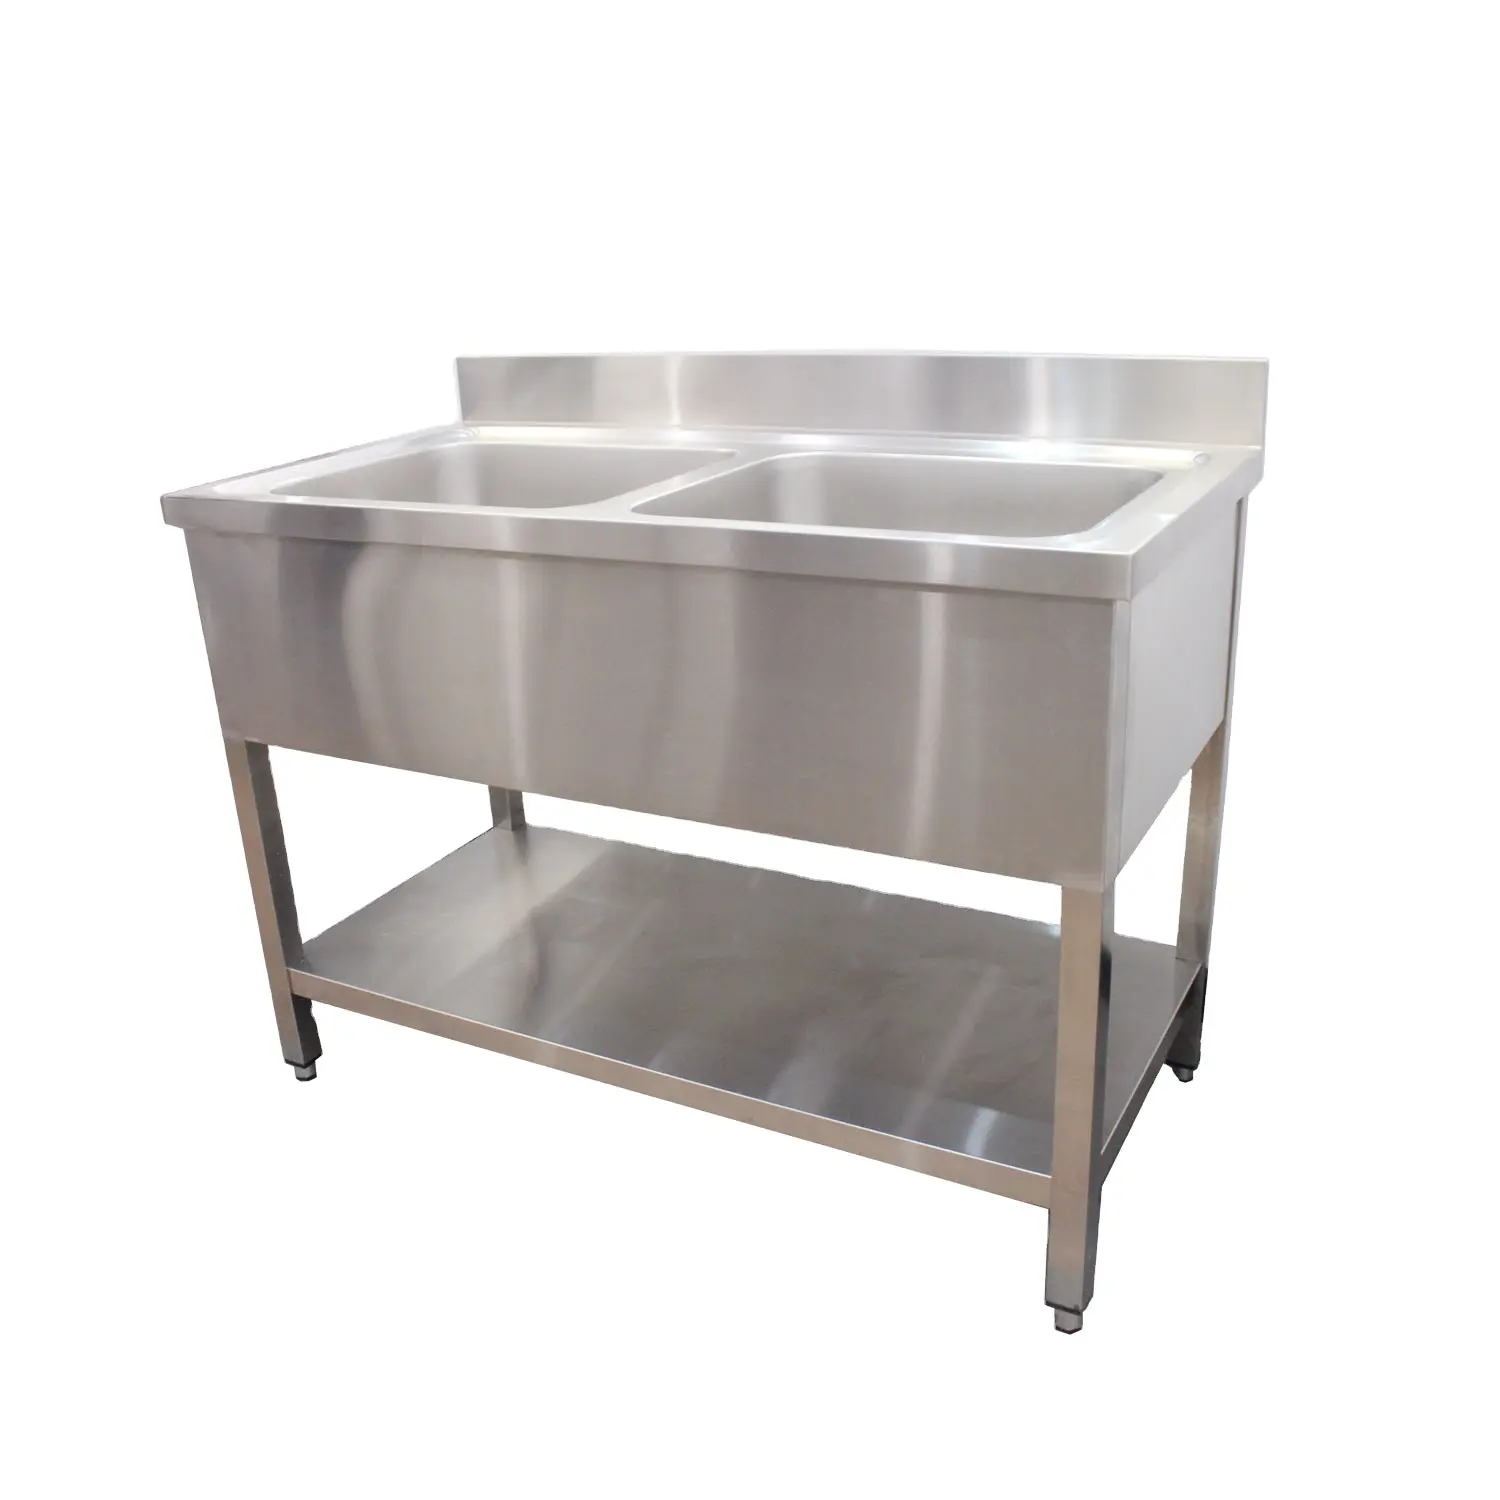 Double bowl sink with baseplate